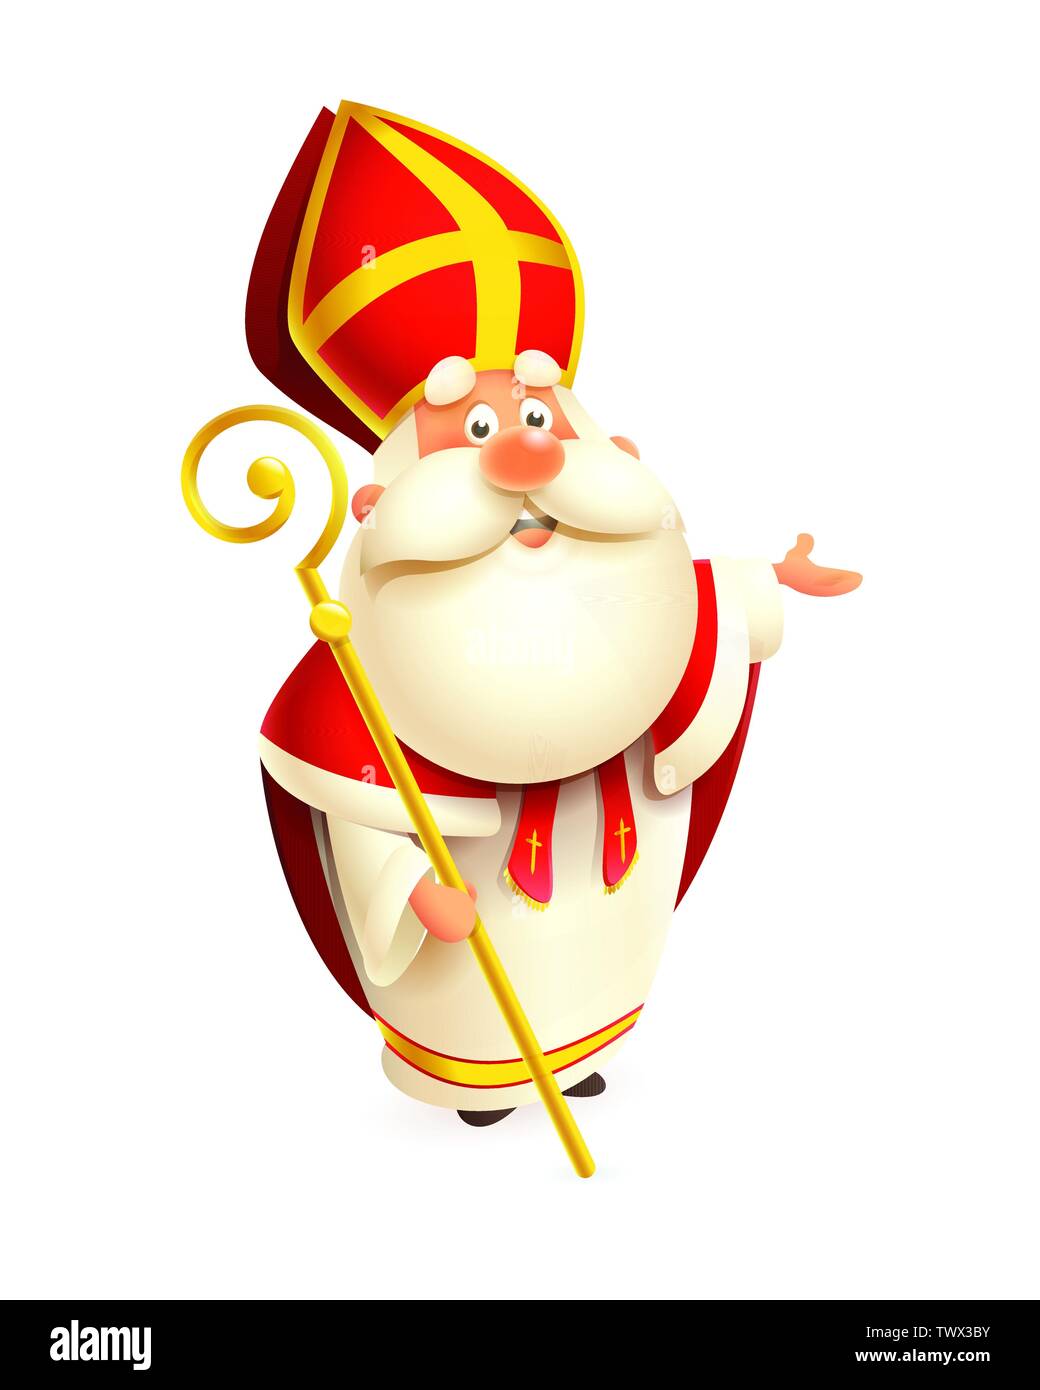 Cute Saint Nicholas with gold scepter presents - vector illustration isolated on white background Stock Vector